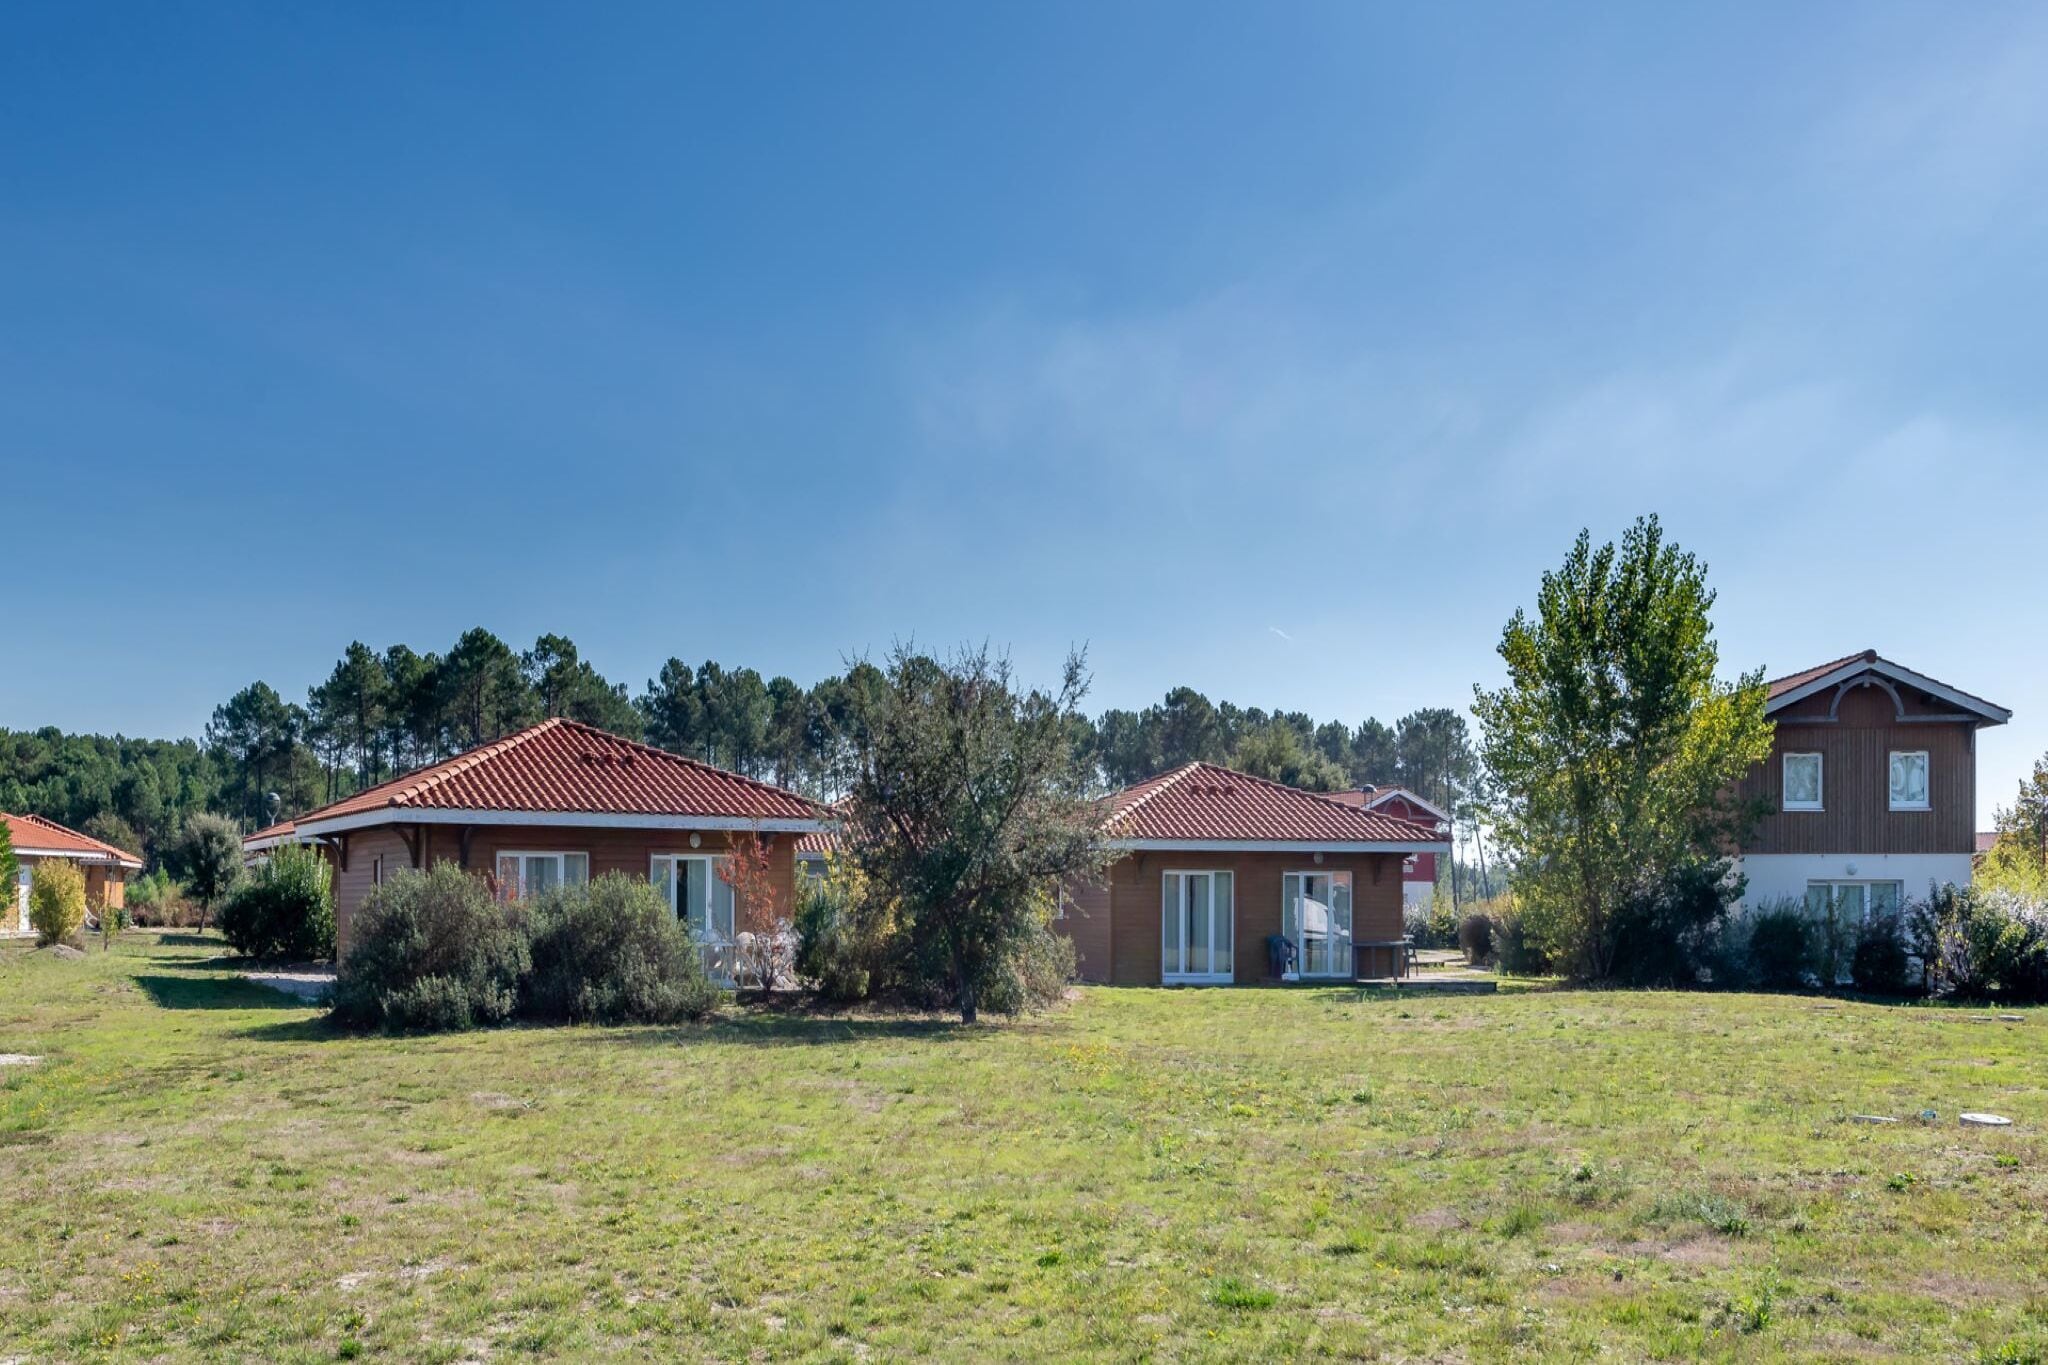 Neat houses near a beautiful lake in sunny Les Landes